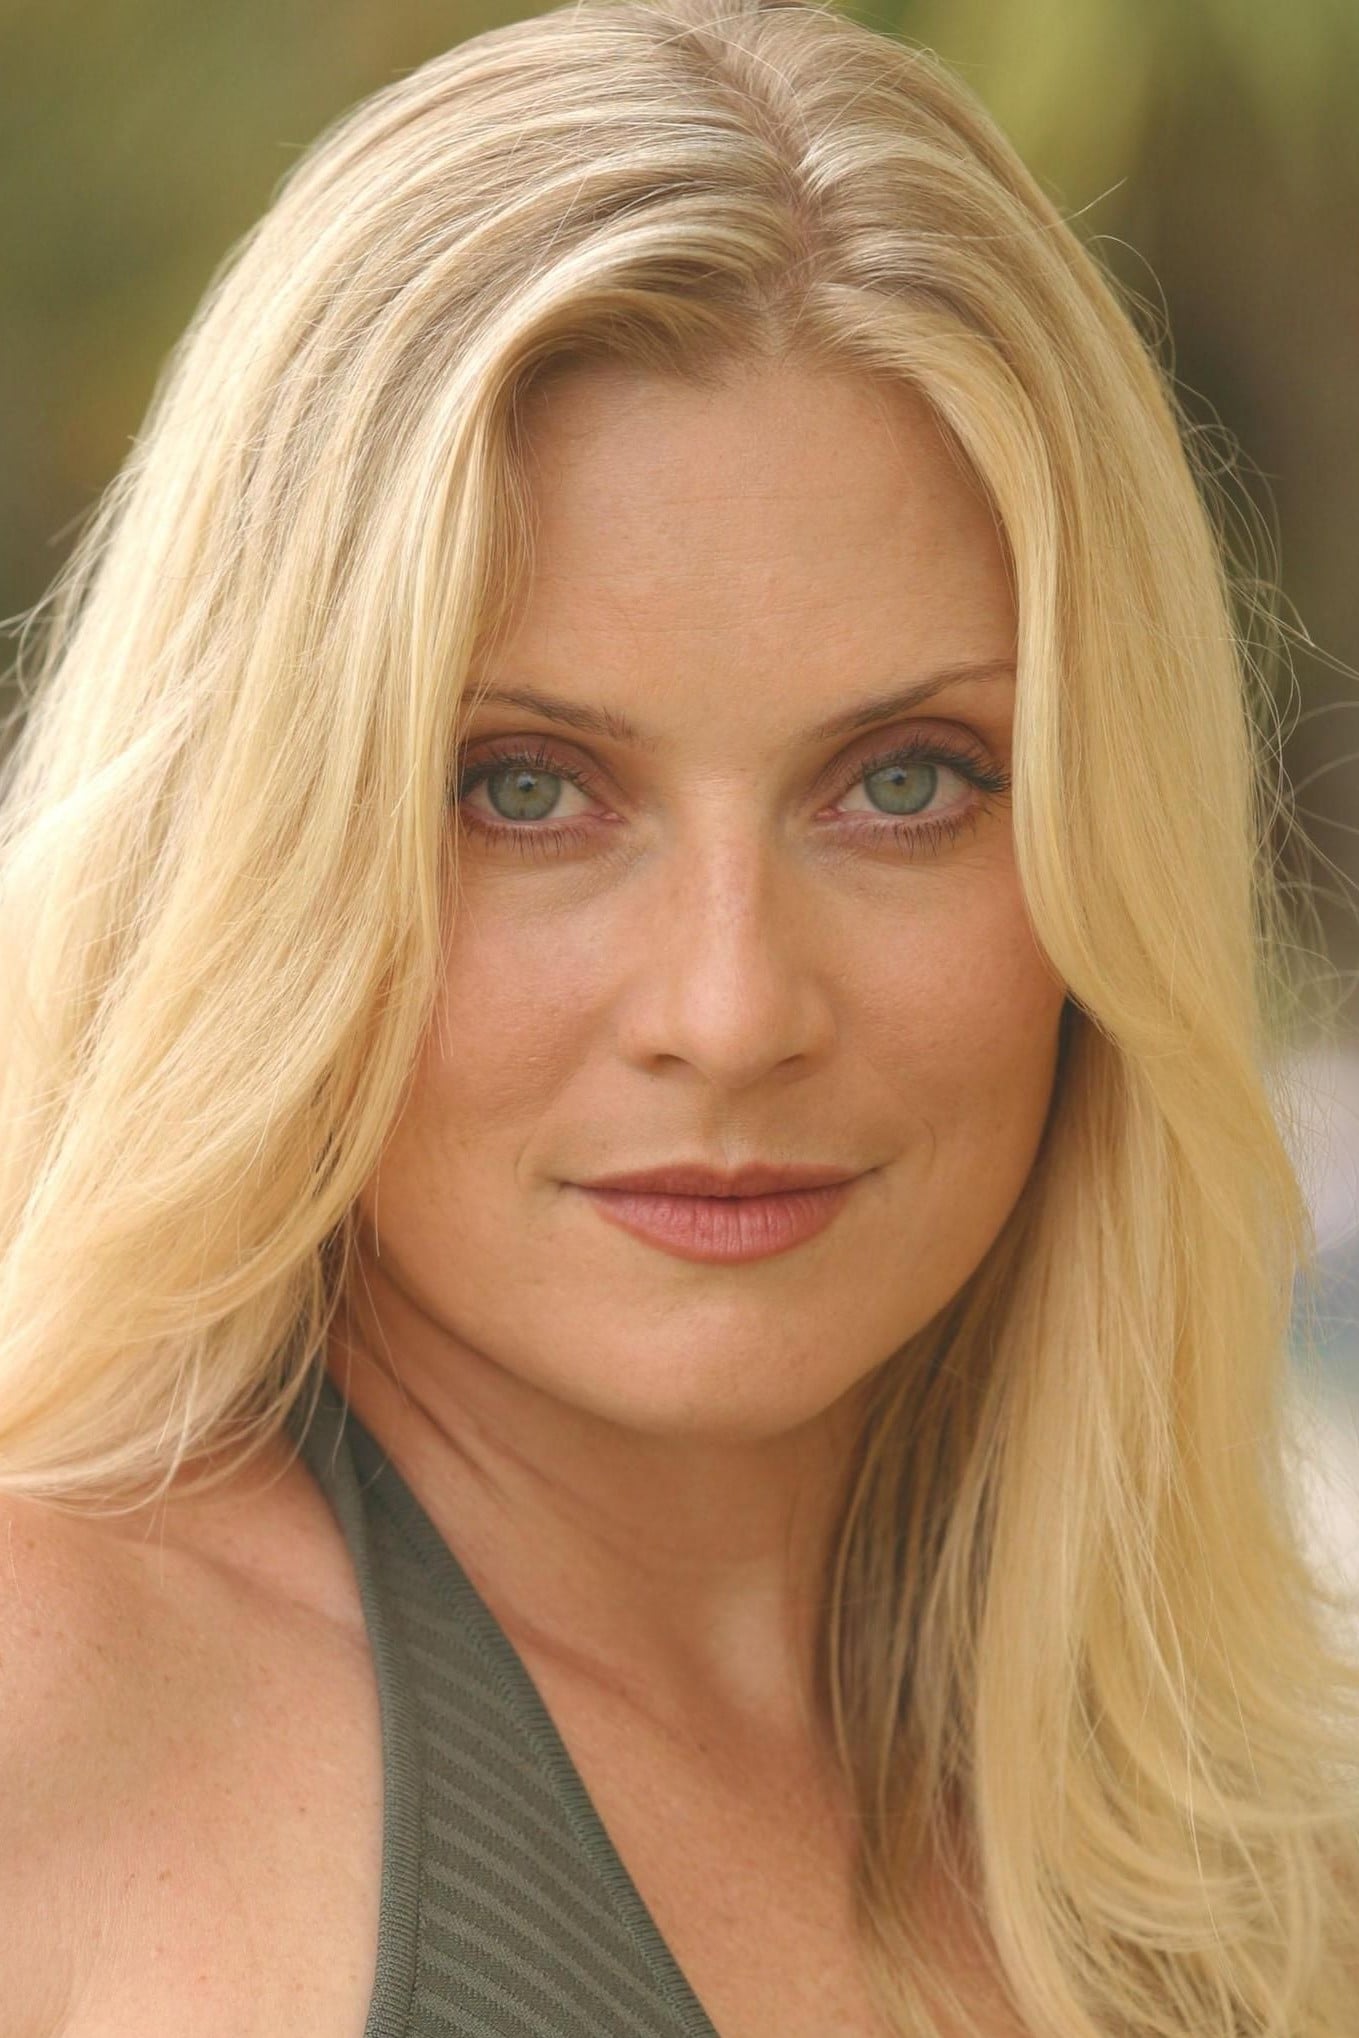 Emily Procter Wallpapers